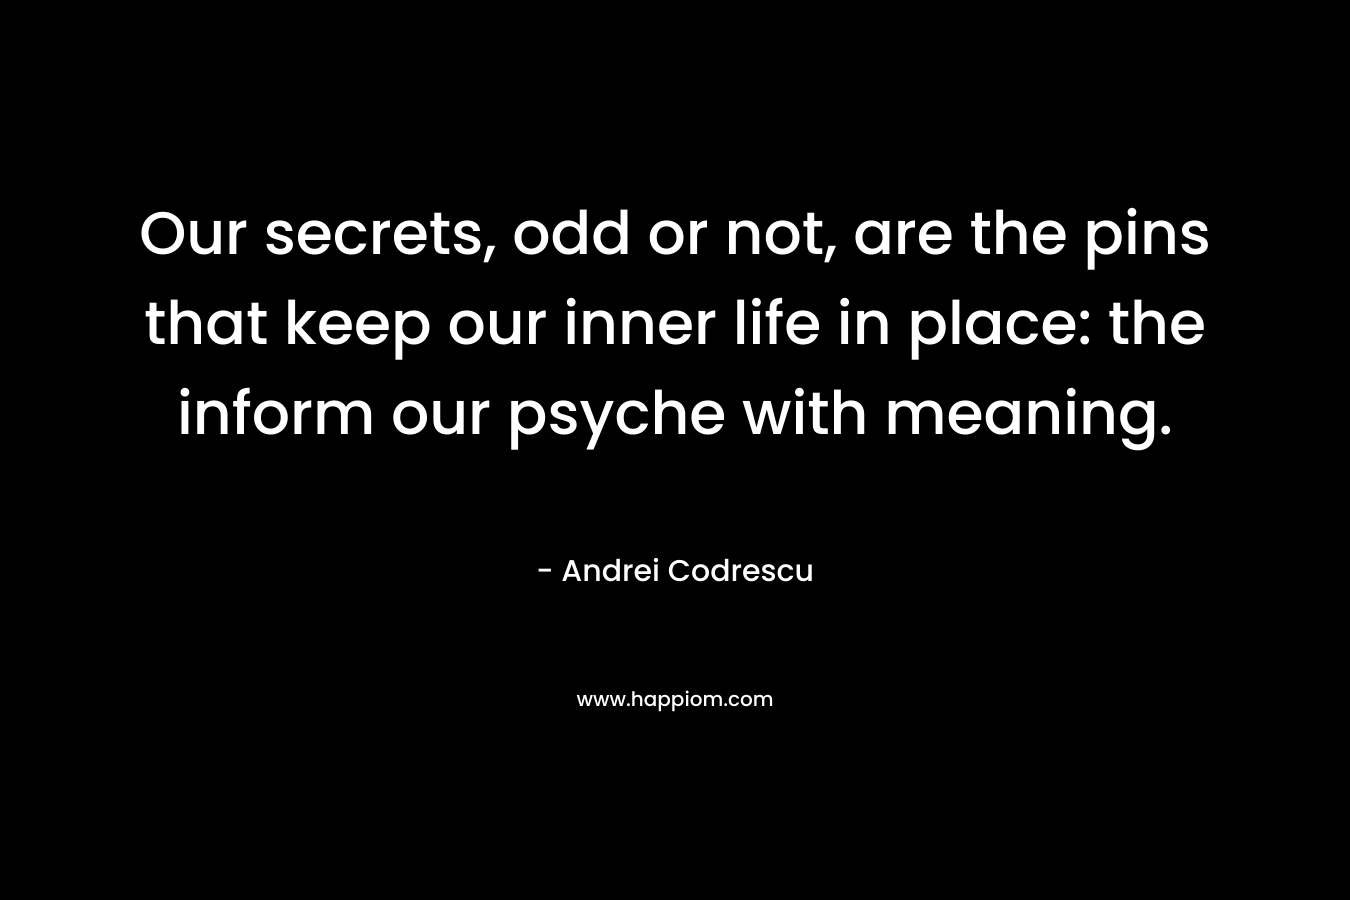 Our secrets, odd or not, are the pins that keep our inner life in place: the inform our psyche with meaning. – Andrei Codrescu